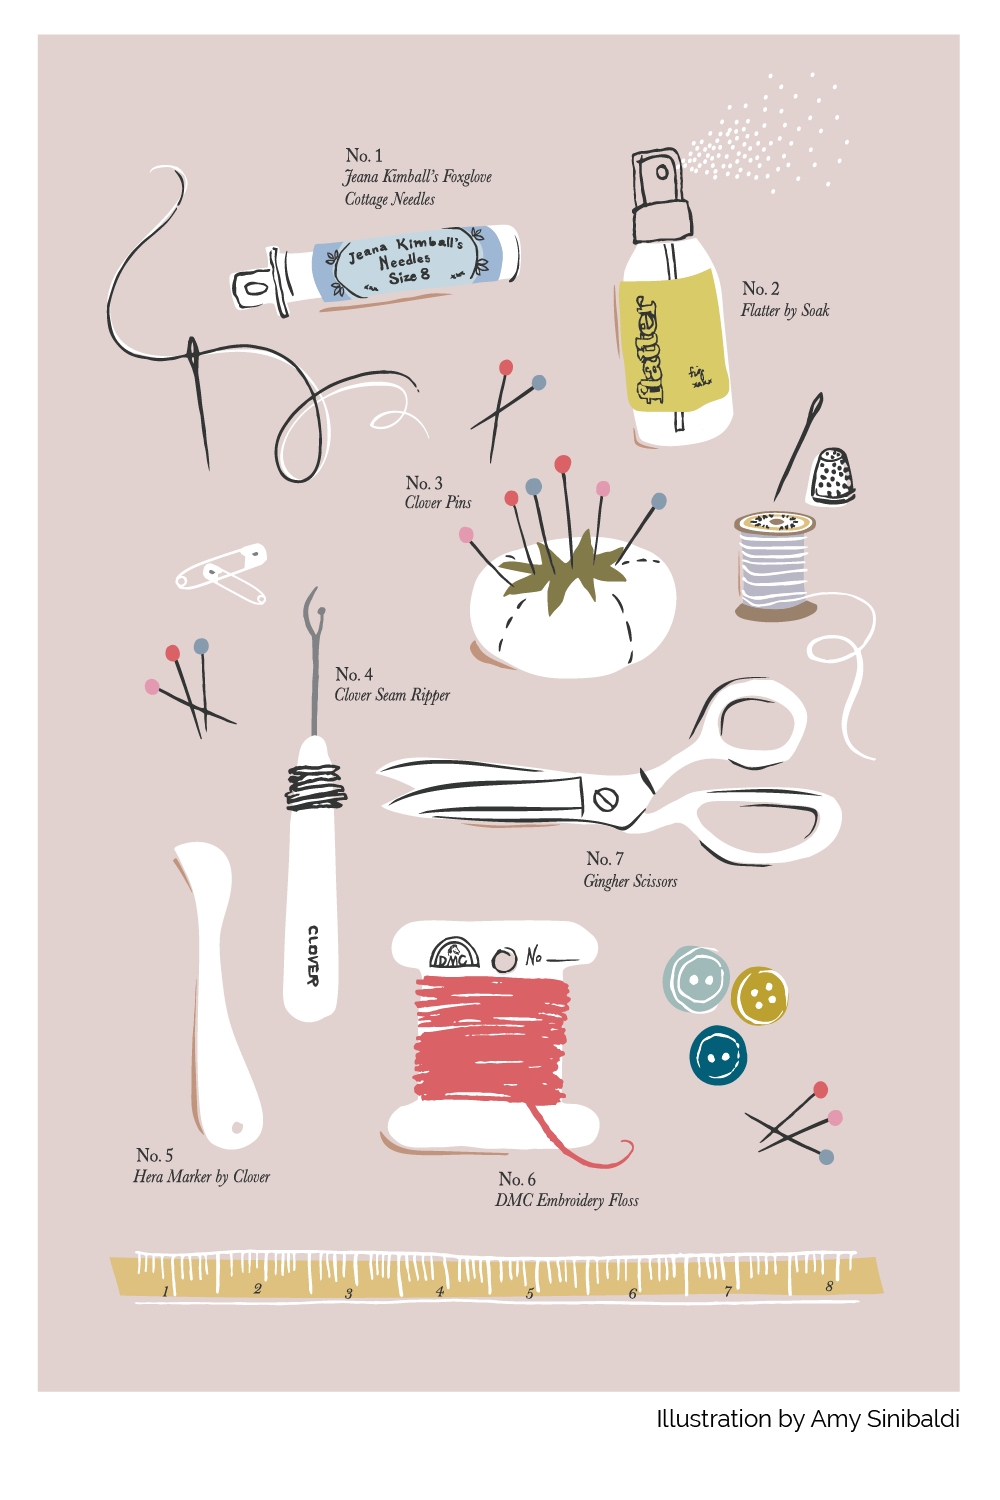 Sewing Tools Poster